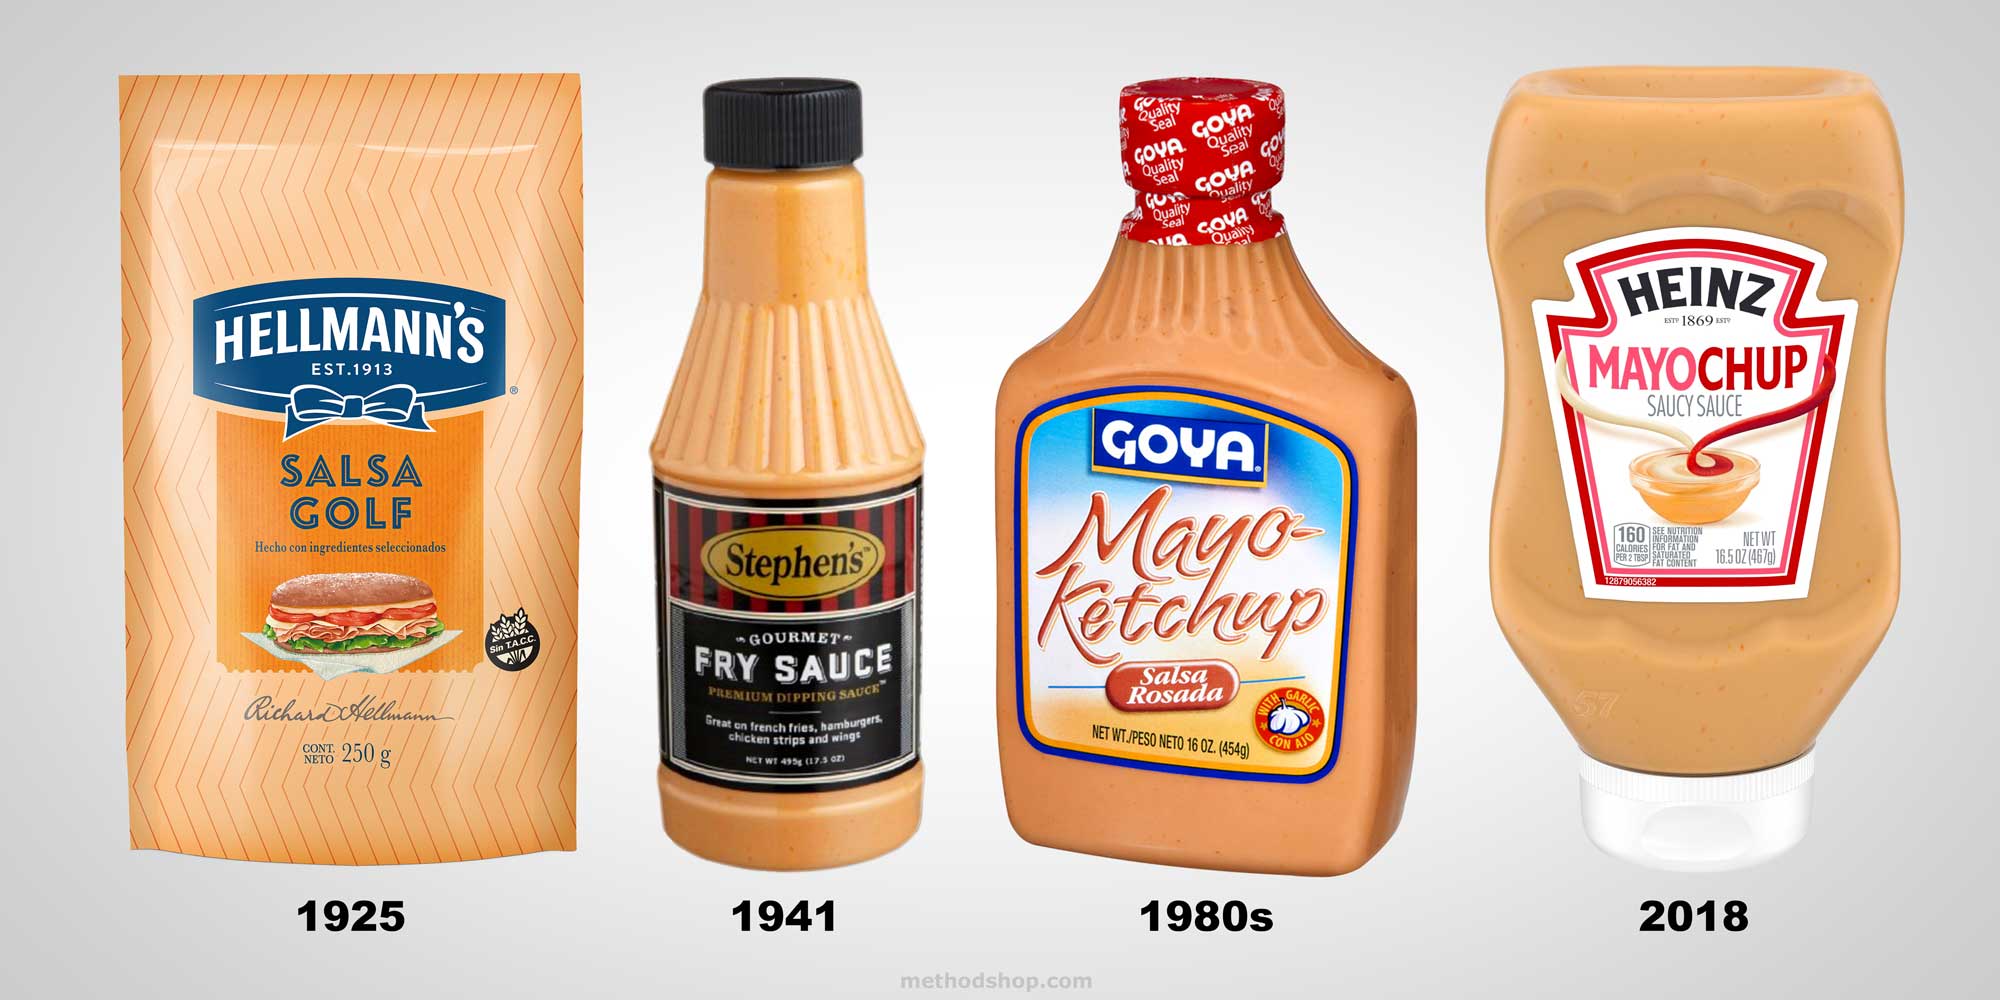 Fry Sauce vs Mayo-Ketchup: Which Was First?